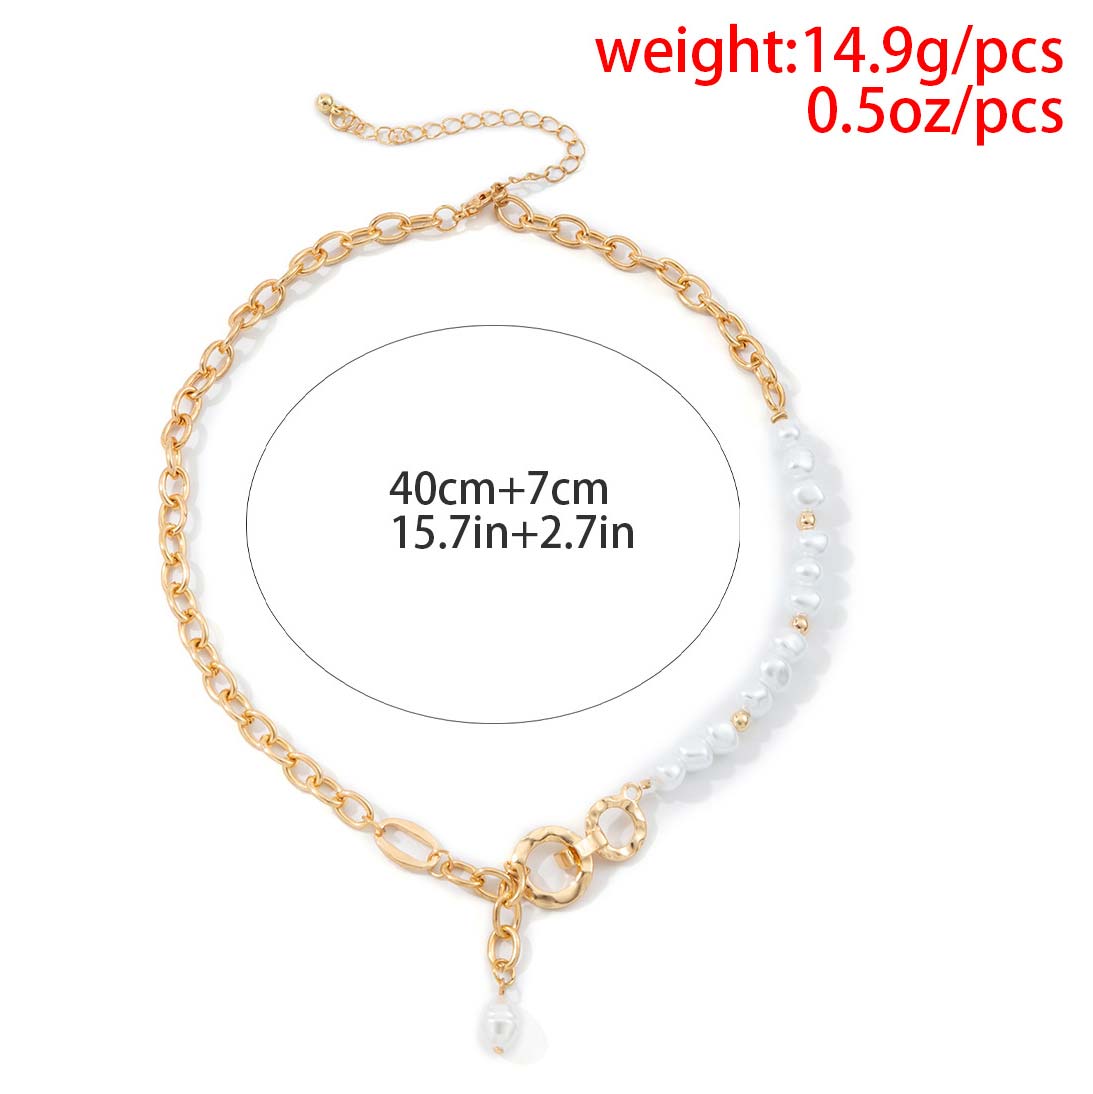 Chain Detail Golden Metal Pearl Necklace